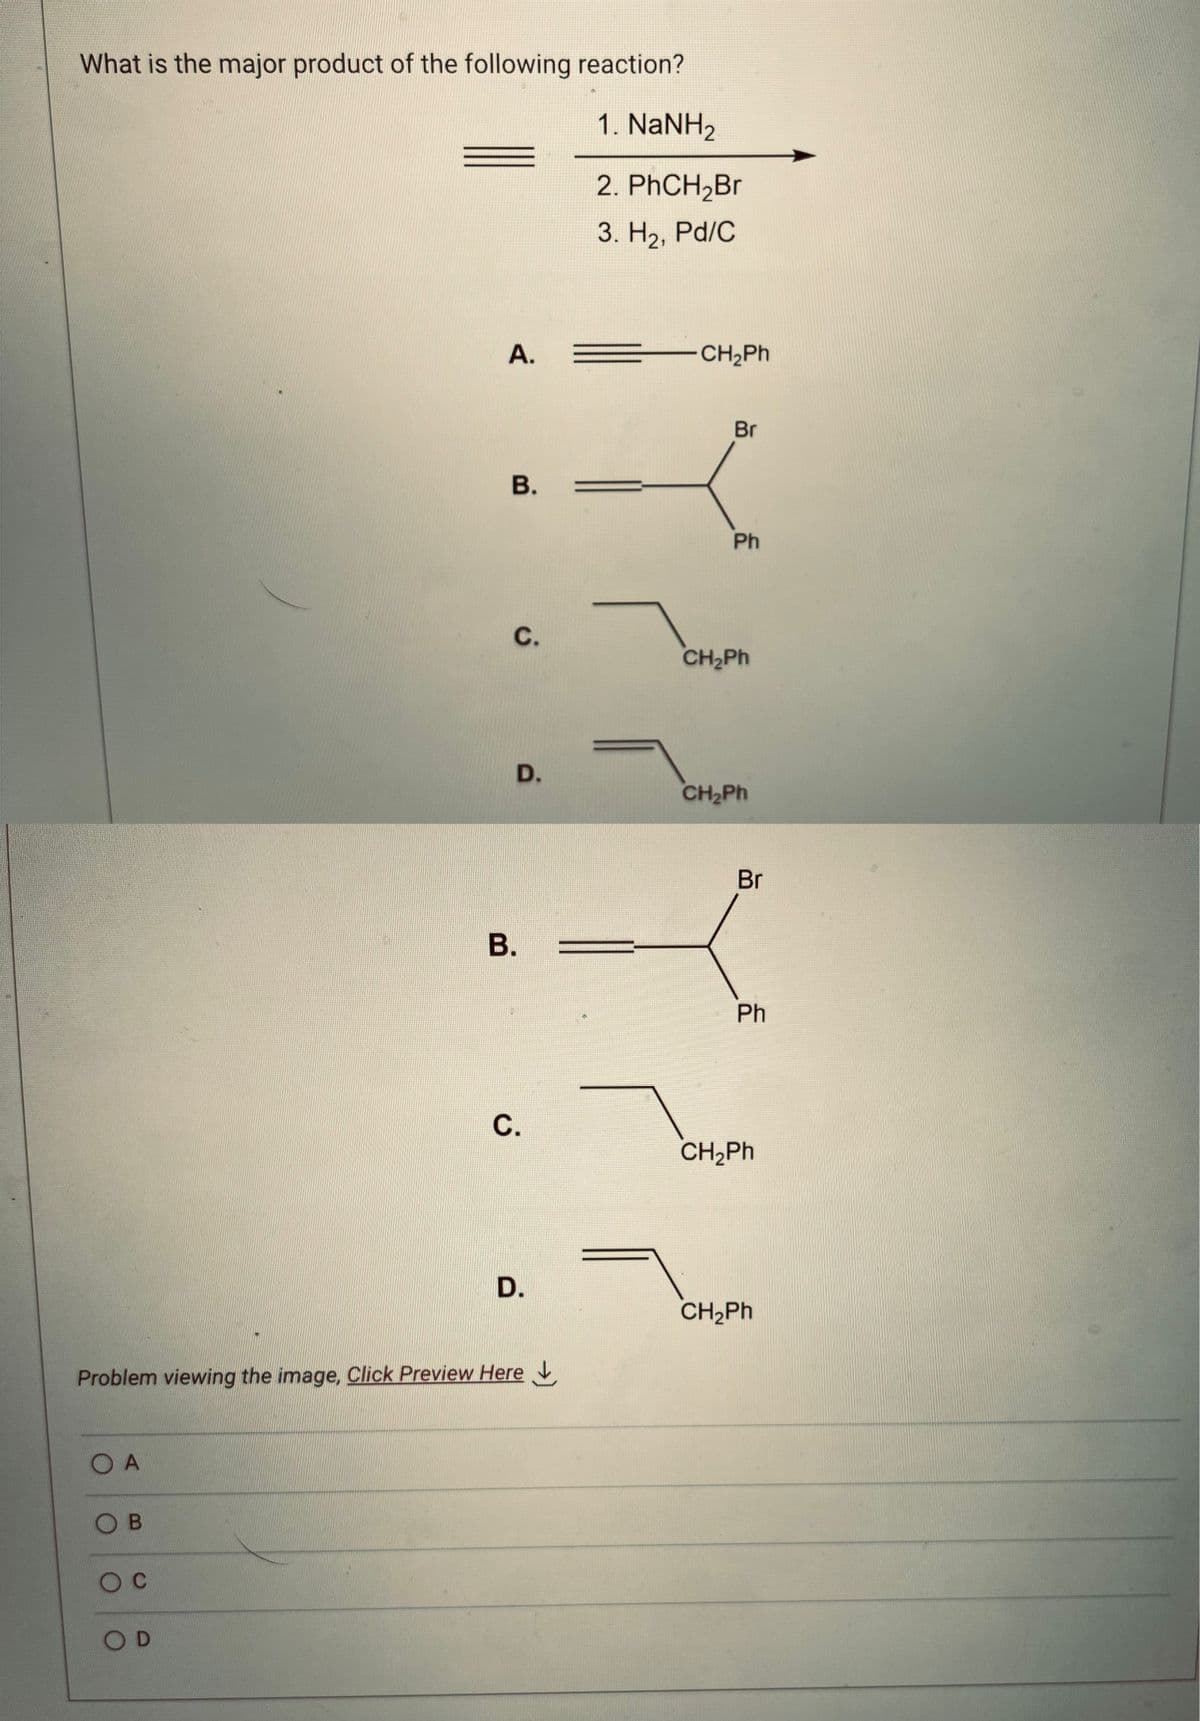 What is the major product of the following reaction?
1. NaNH2
2. PhCH₂Br
3. H₂, Pd/C
O A
OB
O C
A.
OD
B.
C.
D.
Problem viewing the image. Click Preview Here
B.
C.
D.
CH,Ph
Ph
CH,Ph
CH,Ph
Br
Ph
CH,Ph
CH,Ph